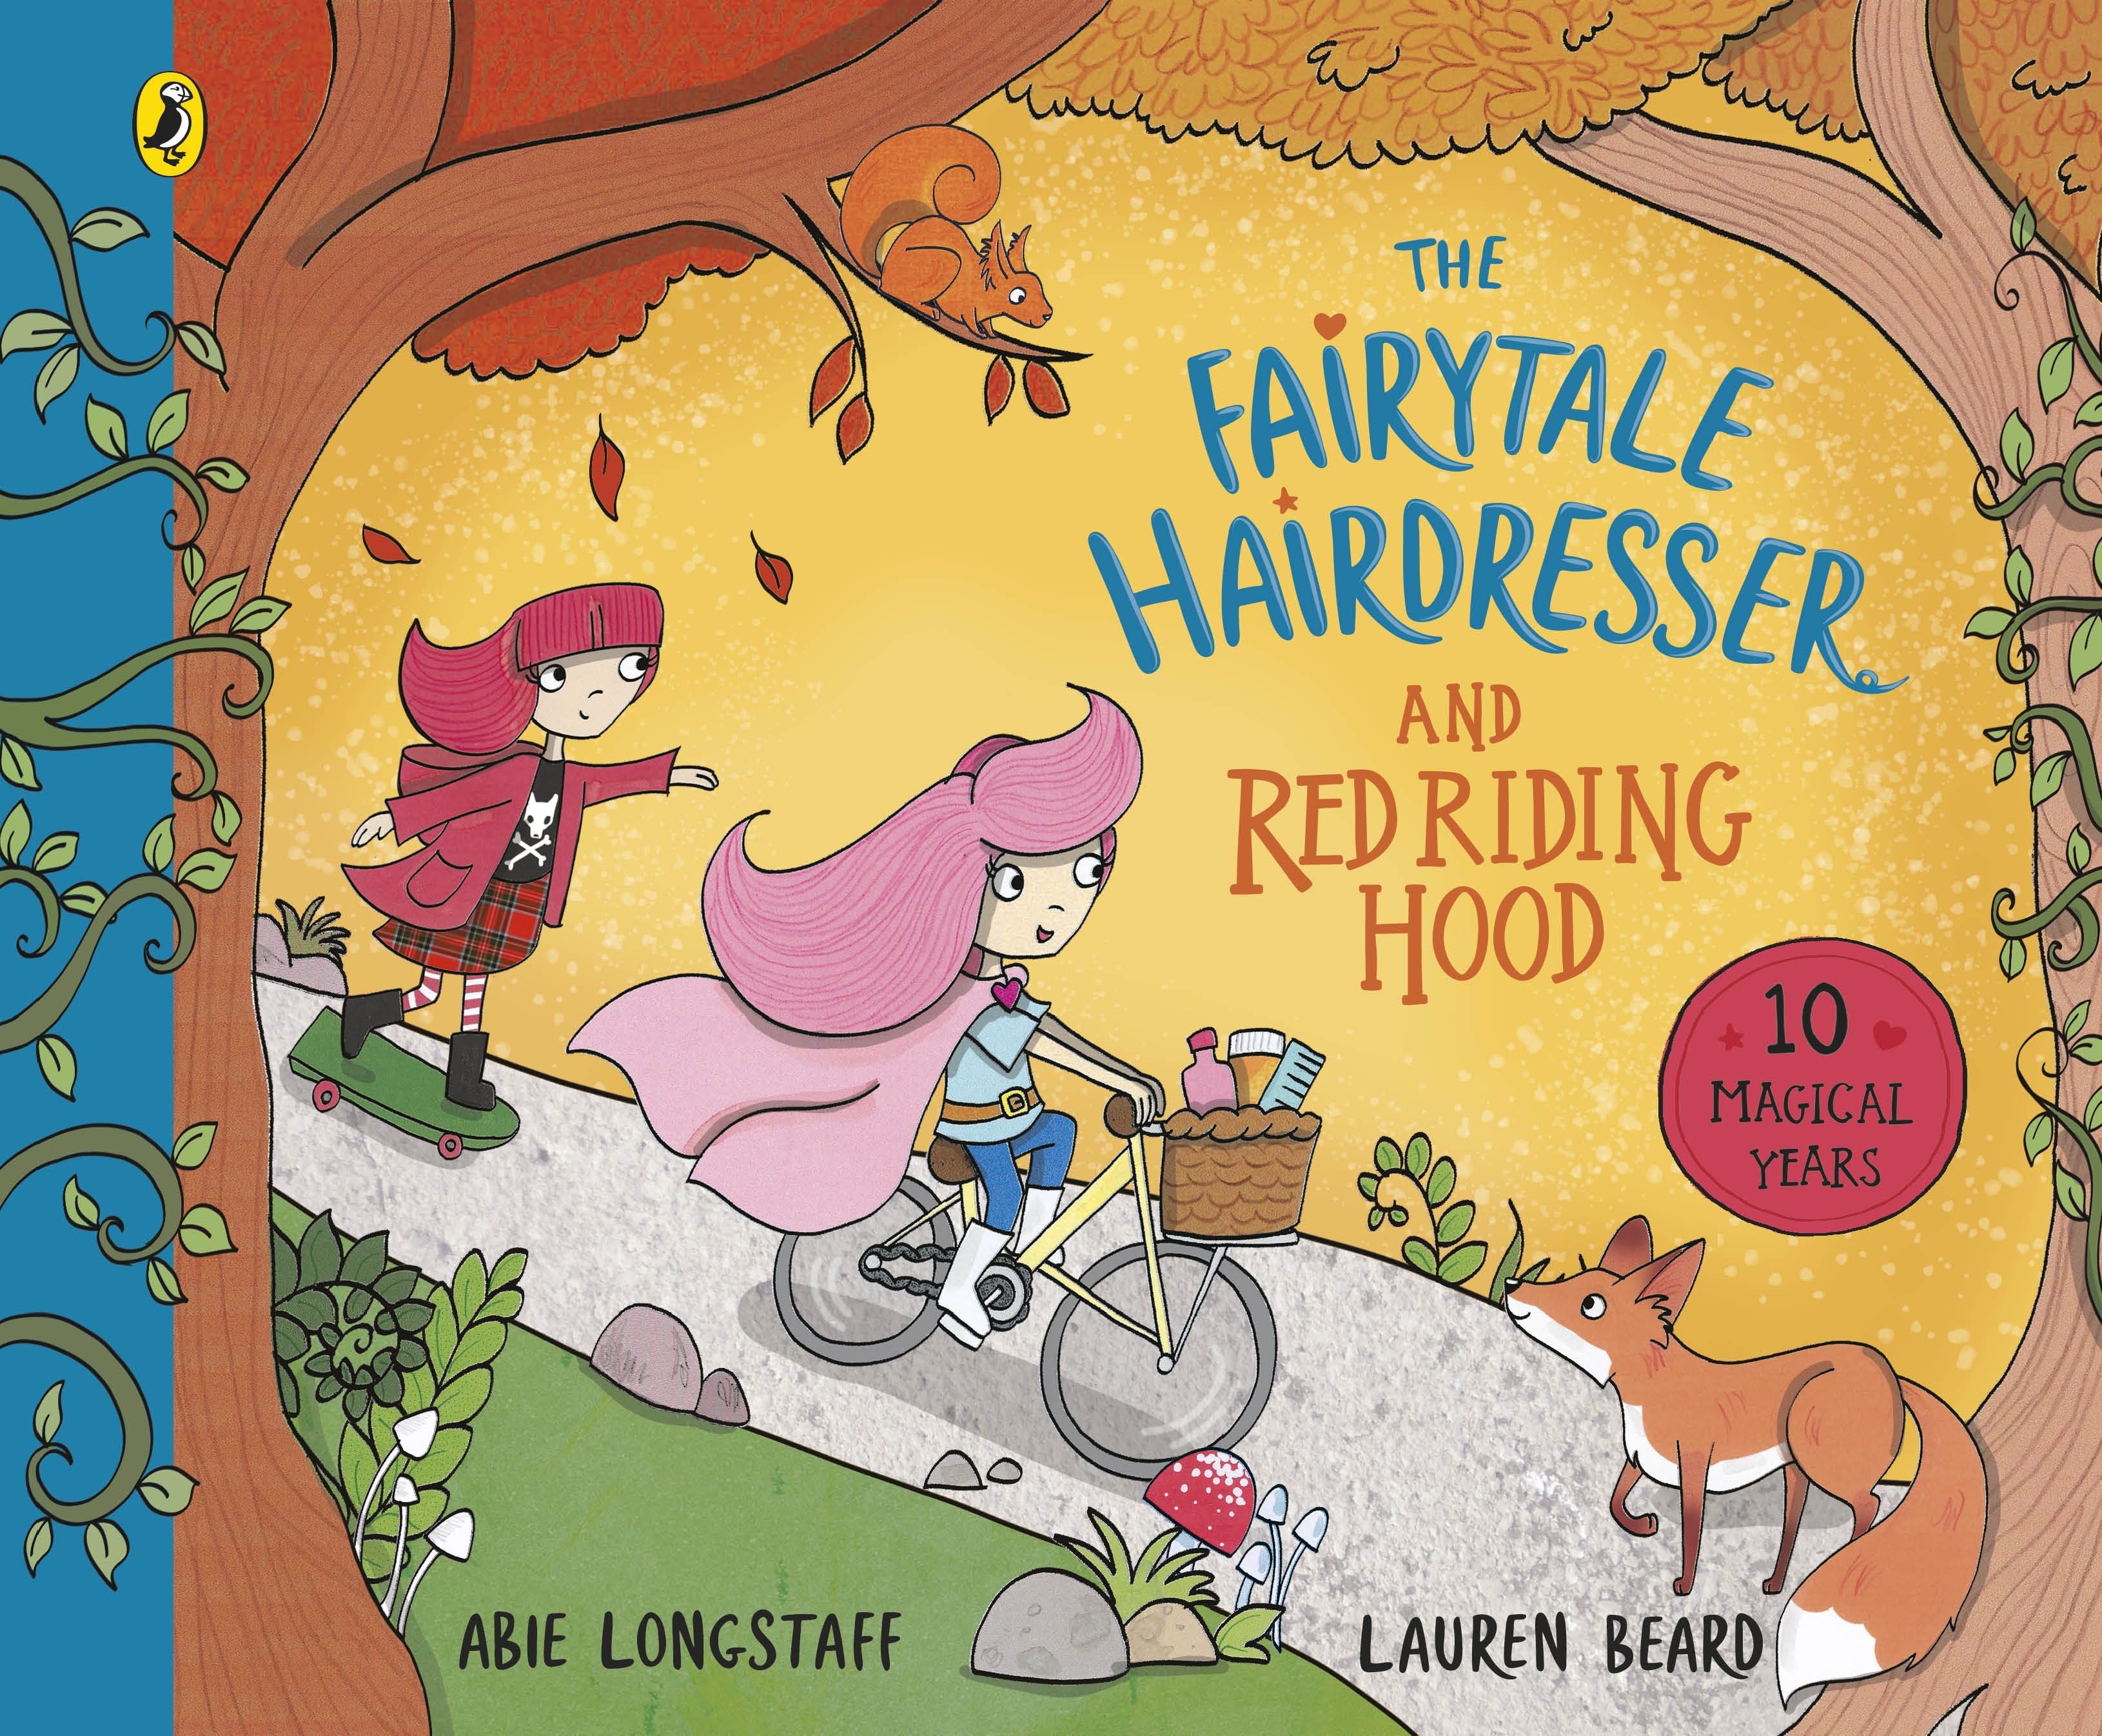 Book “The Fairytale Hairdresser and Red Riding Hood” by Abie Longstaff — July 8, 2021